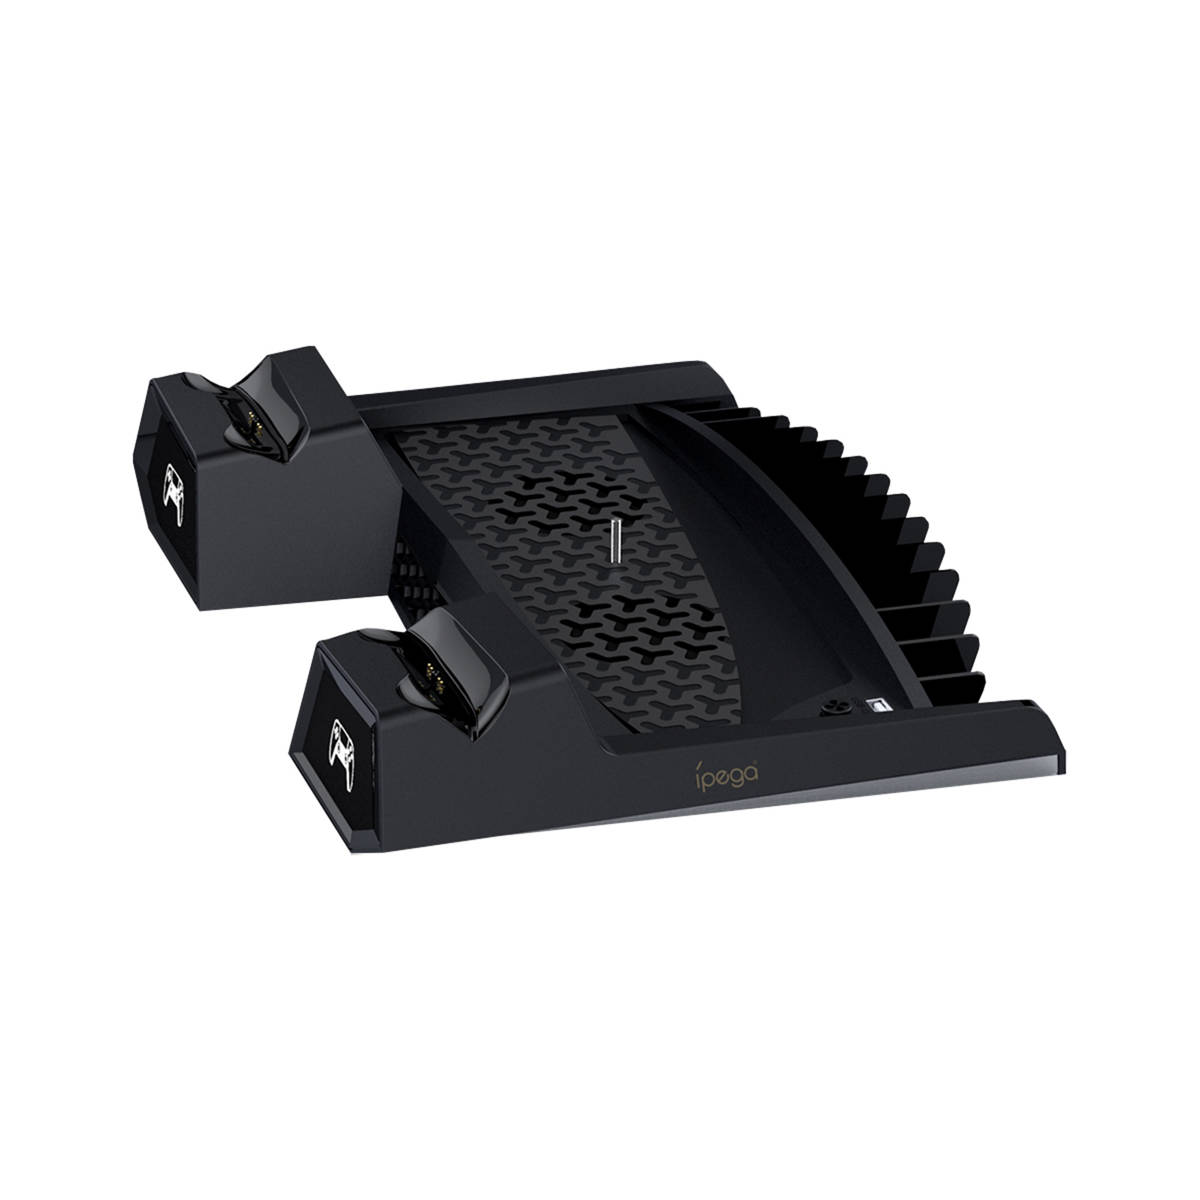 Ipega Pg-P5023 Multifunctional Cooling Stand For Ps5 And Accessories (Black)